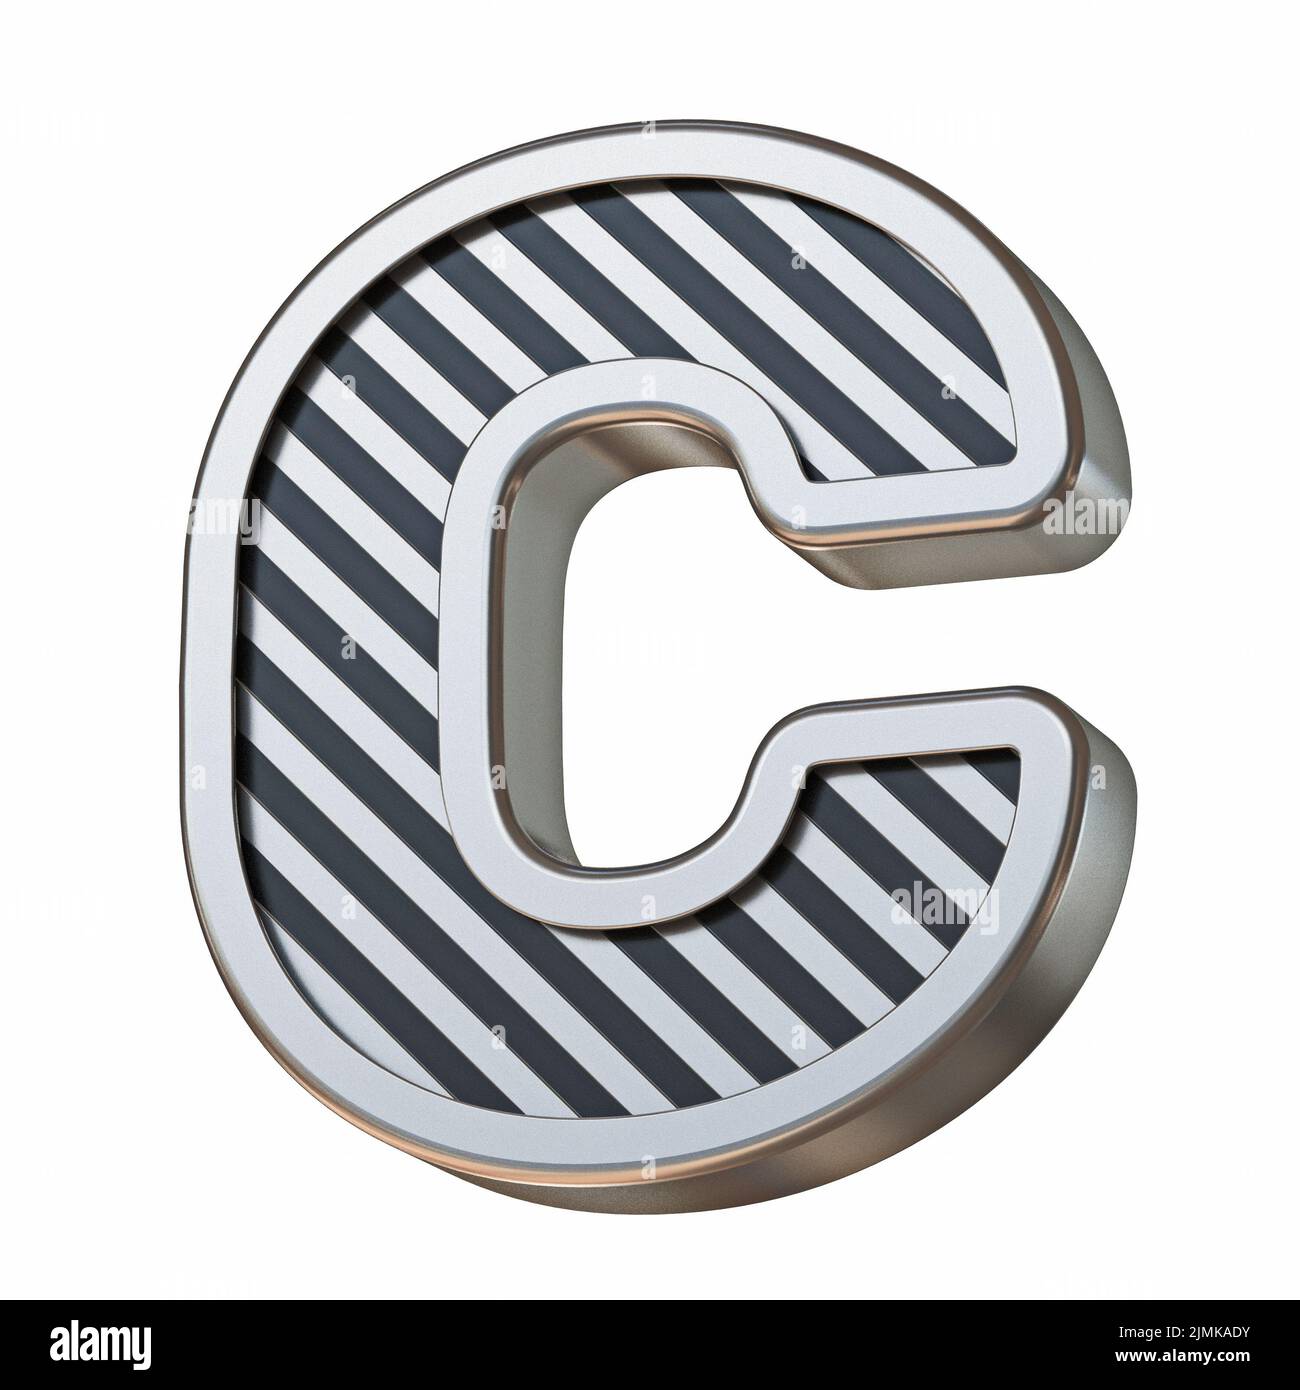 Stainless steel and black stripes font Letter C 3D Stock Photo